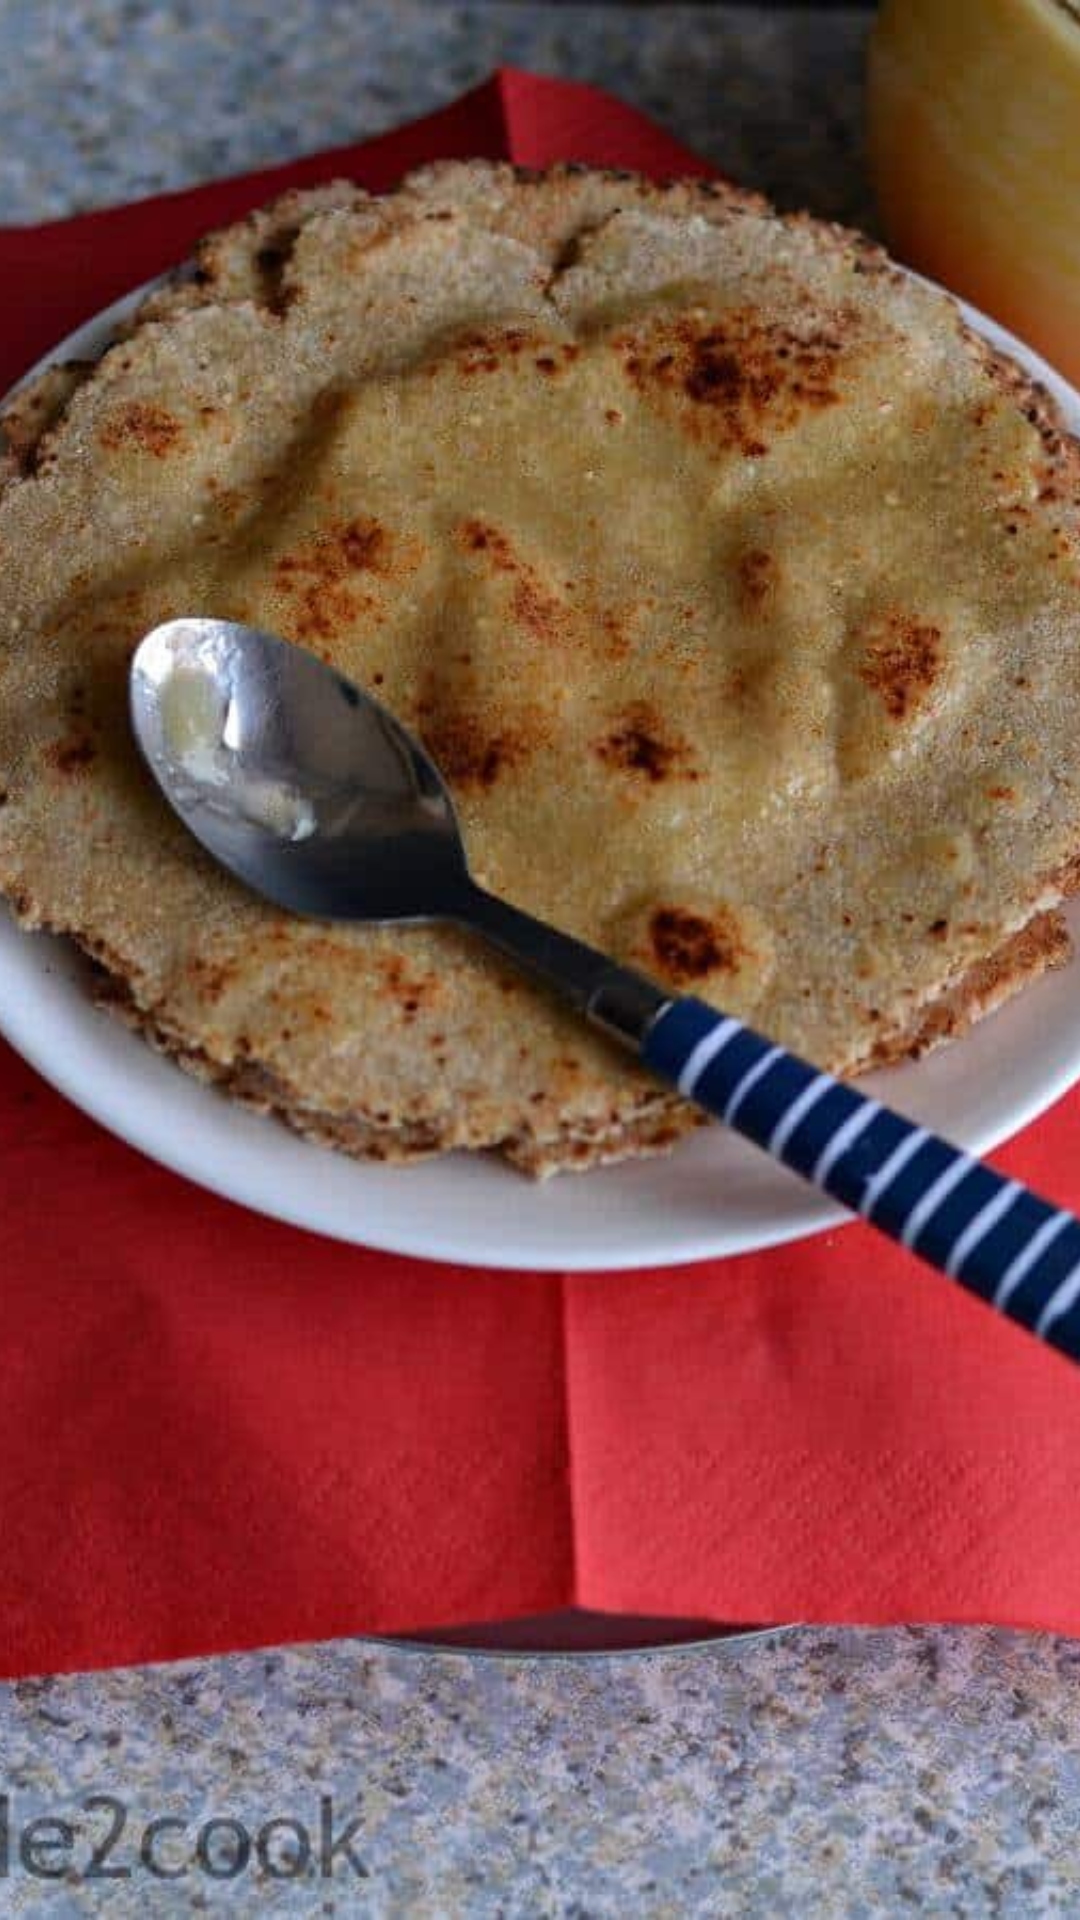 5 healthy alternatives to wheat chapatis for weight loss